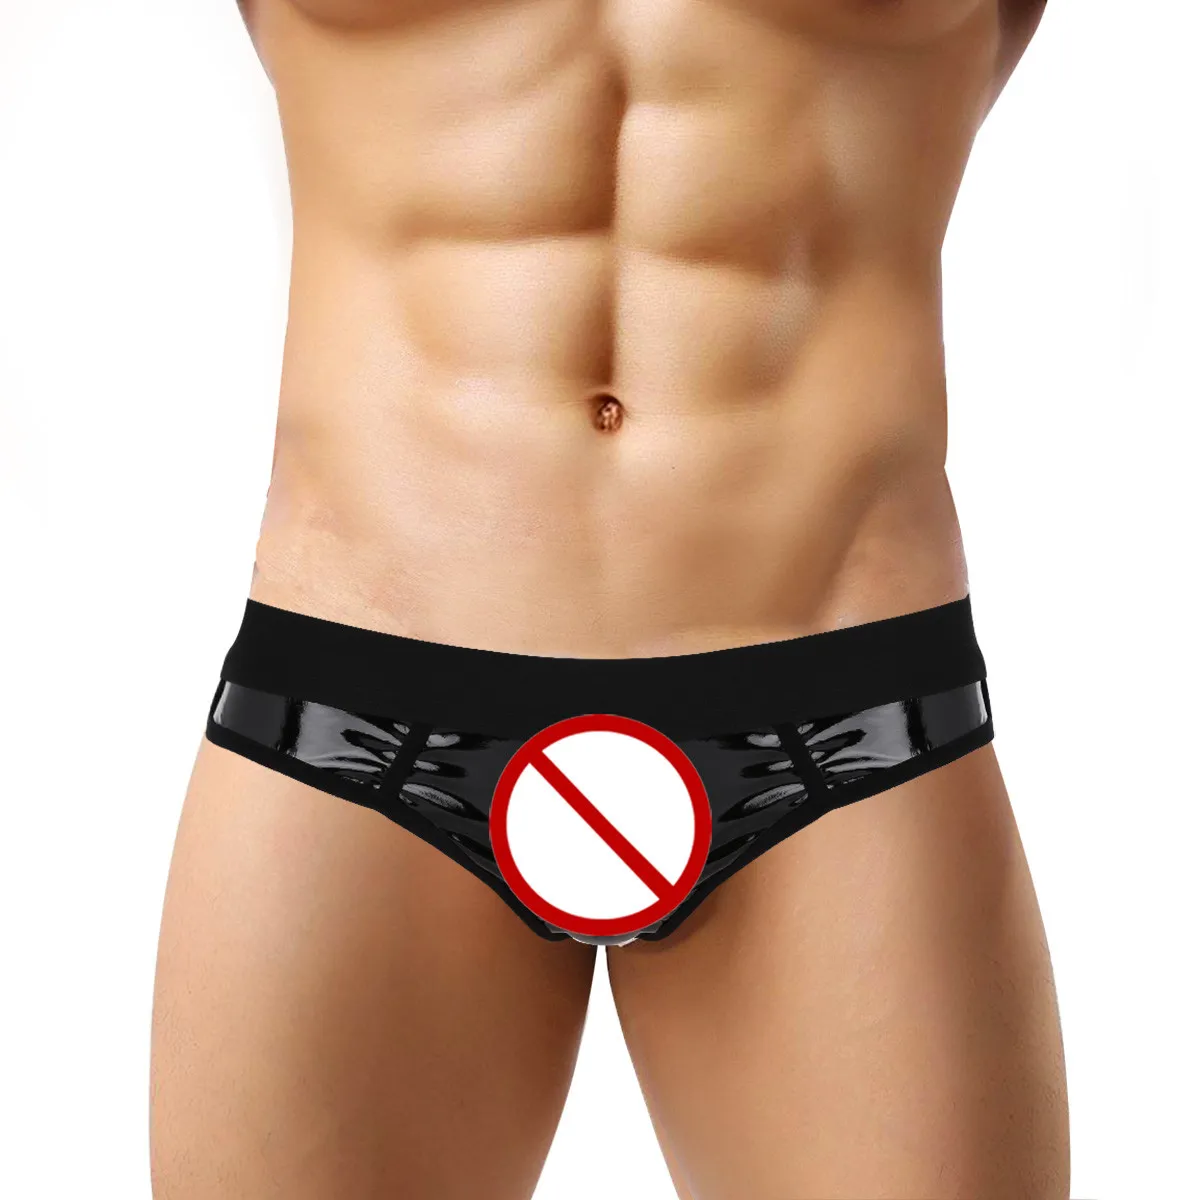 crissy wood recommends Mens Crotchless Undies